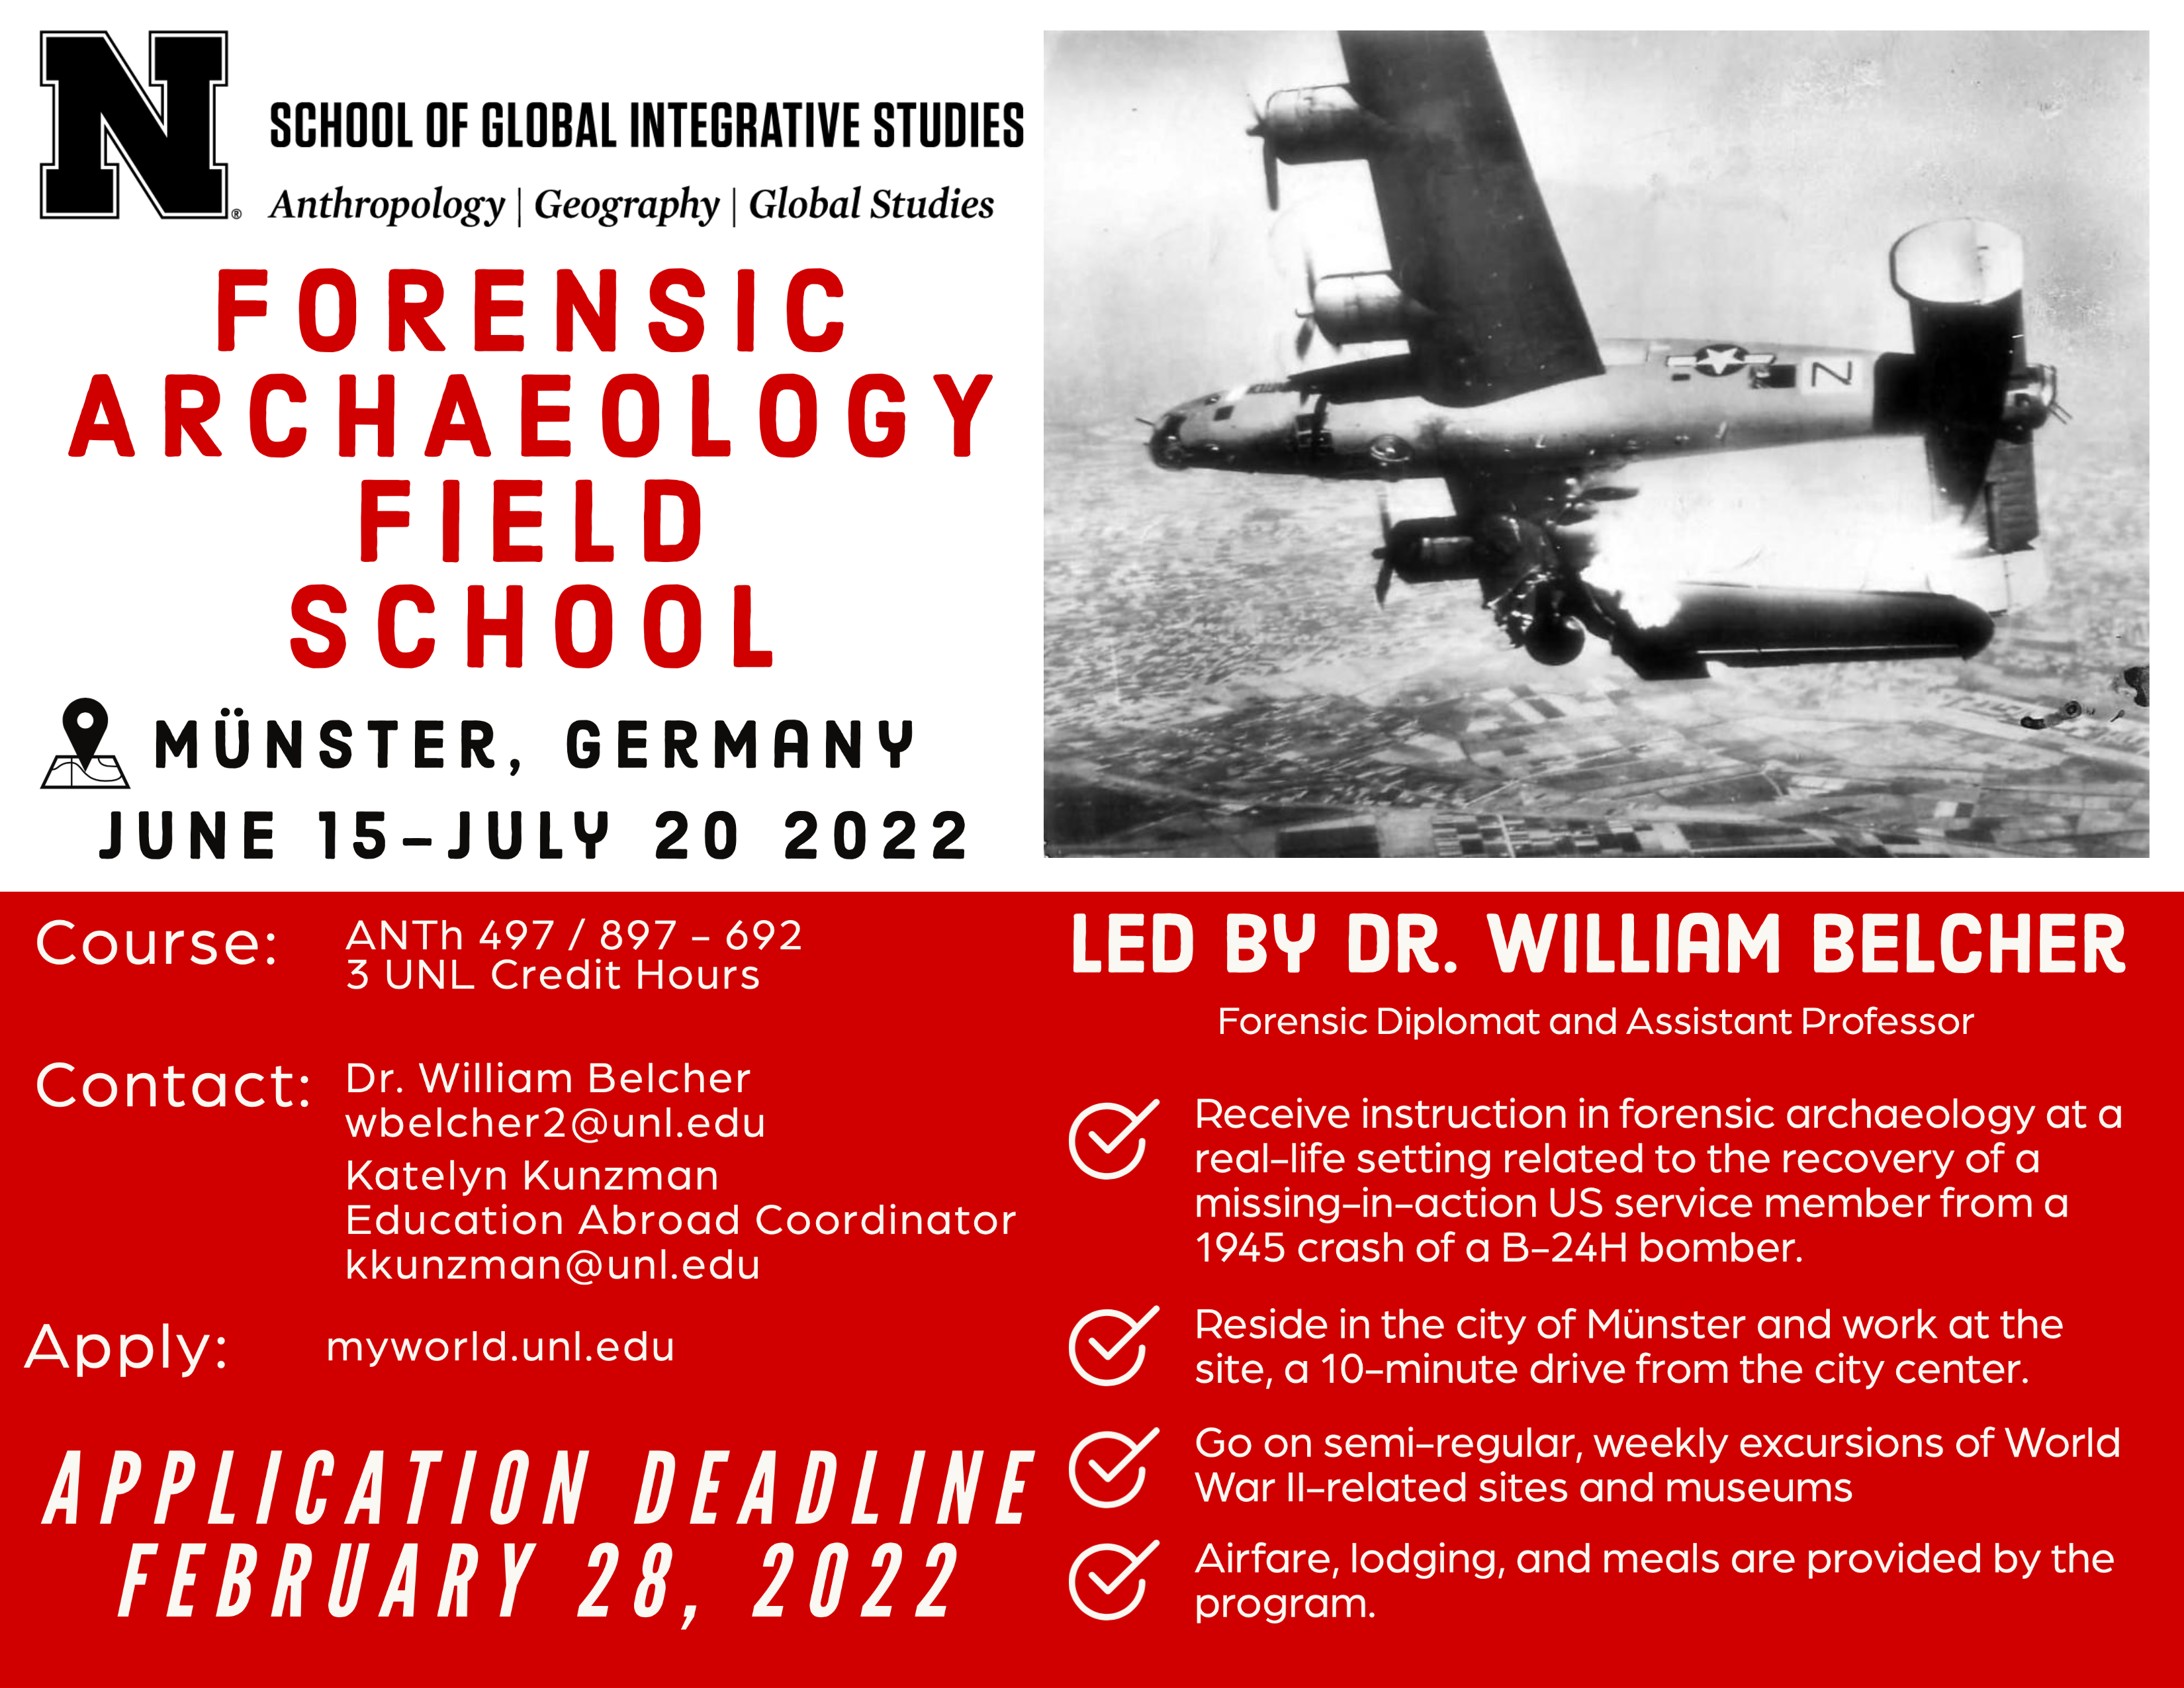 ANTH 497: Summer 2022 Forensic Archaeology Field School in Münster, Germany!